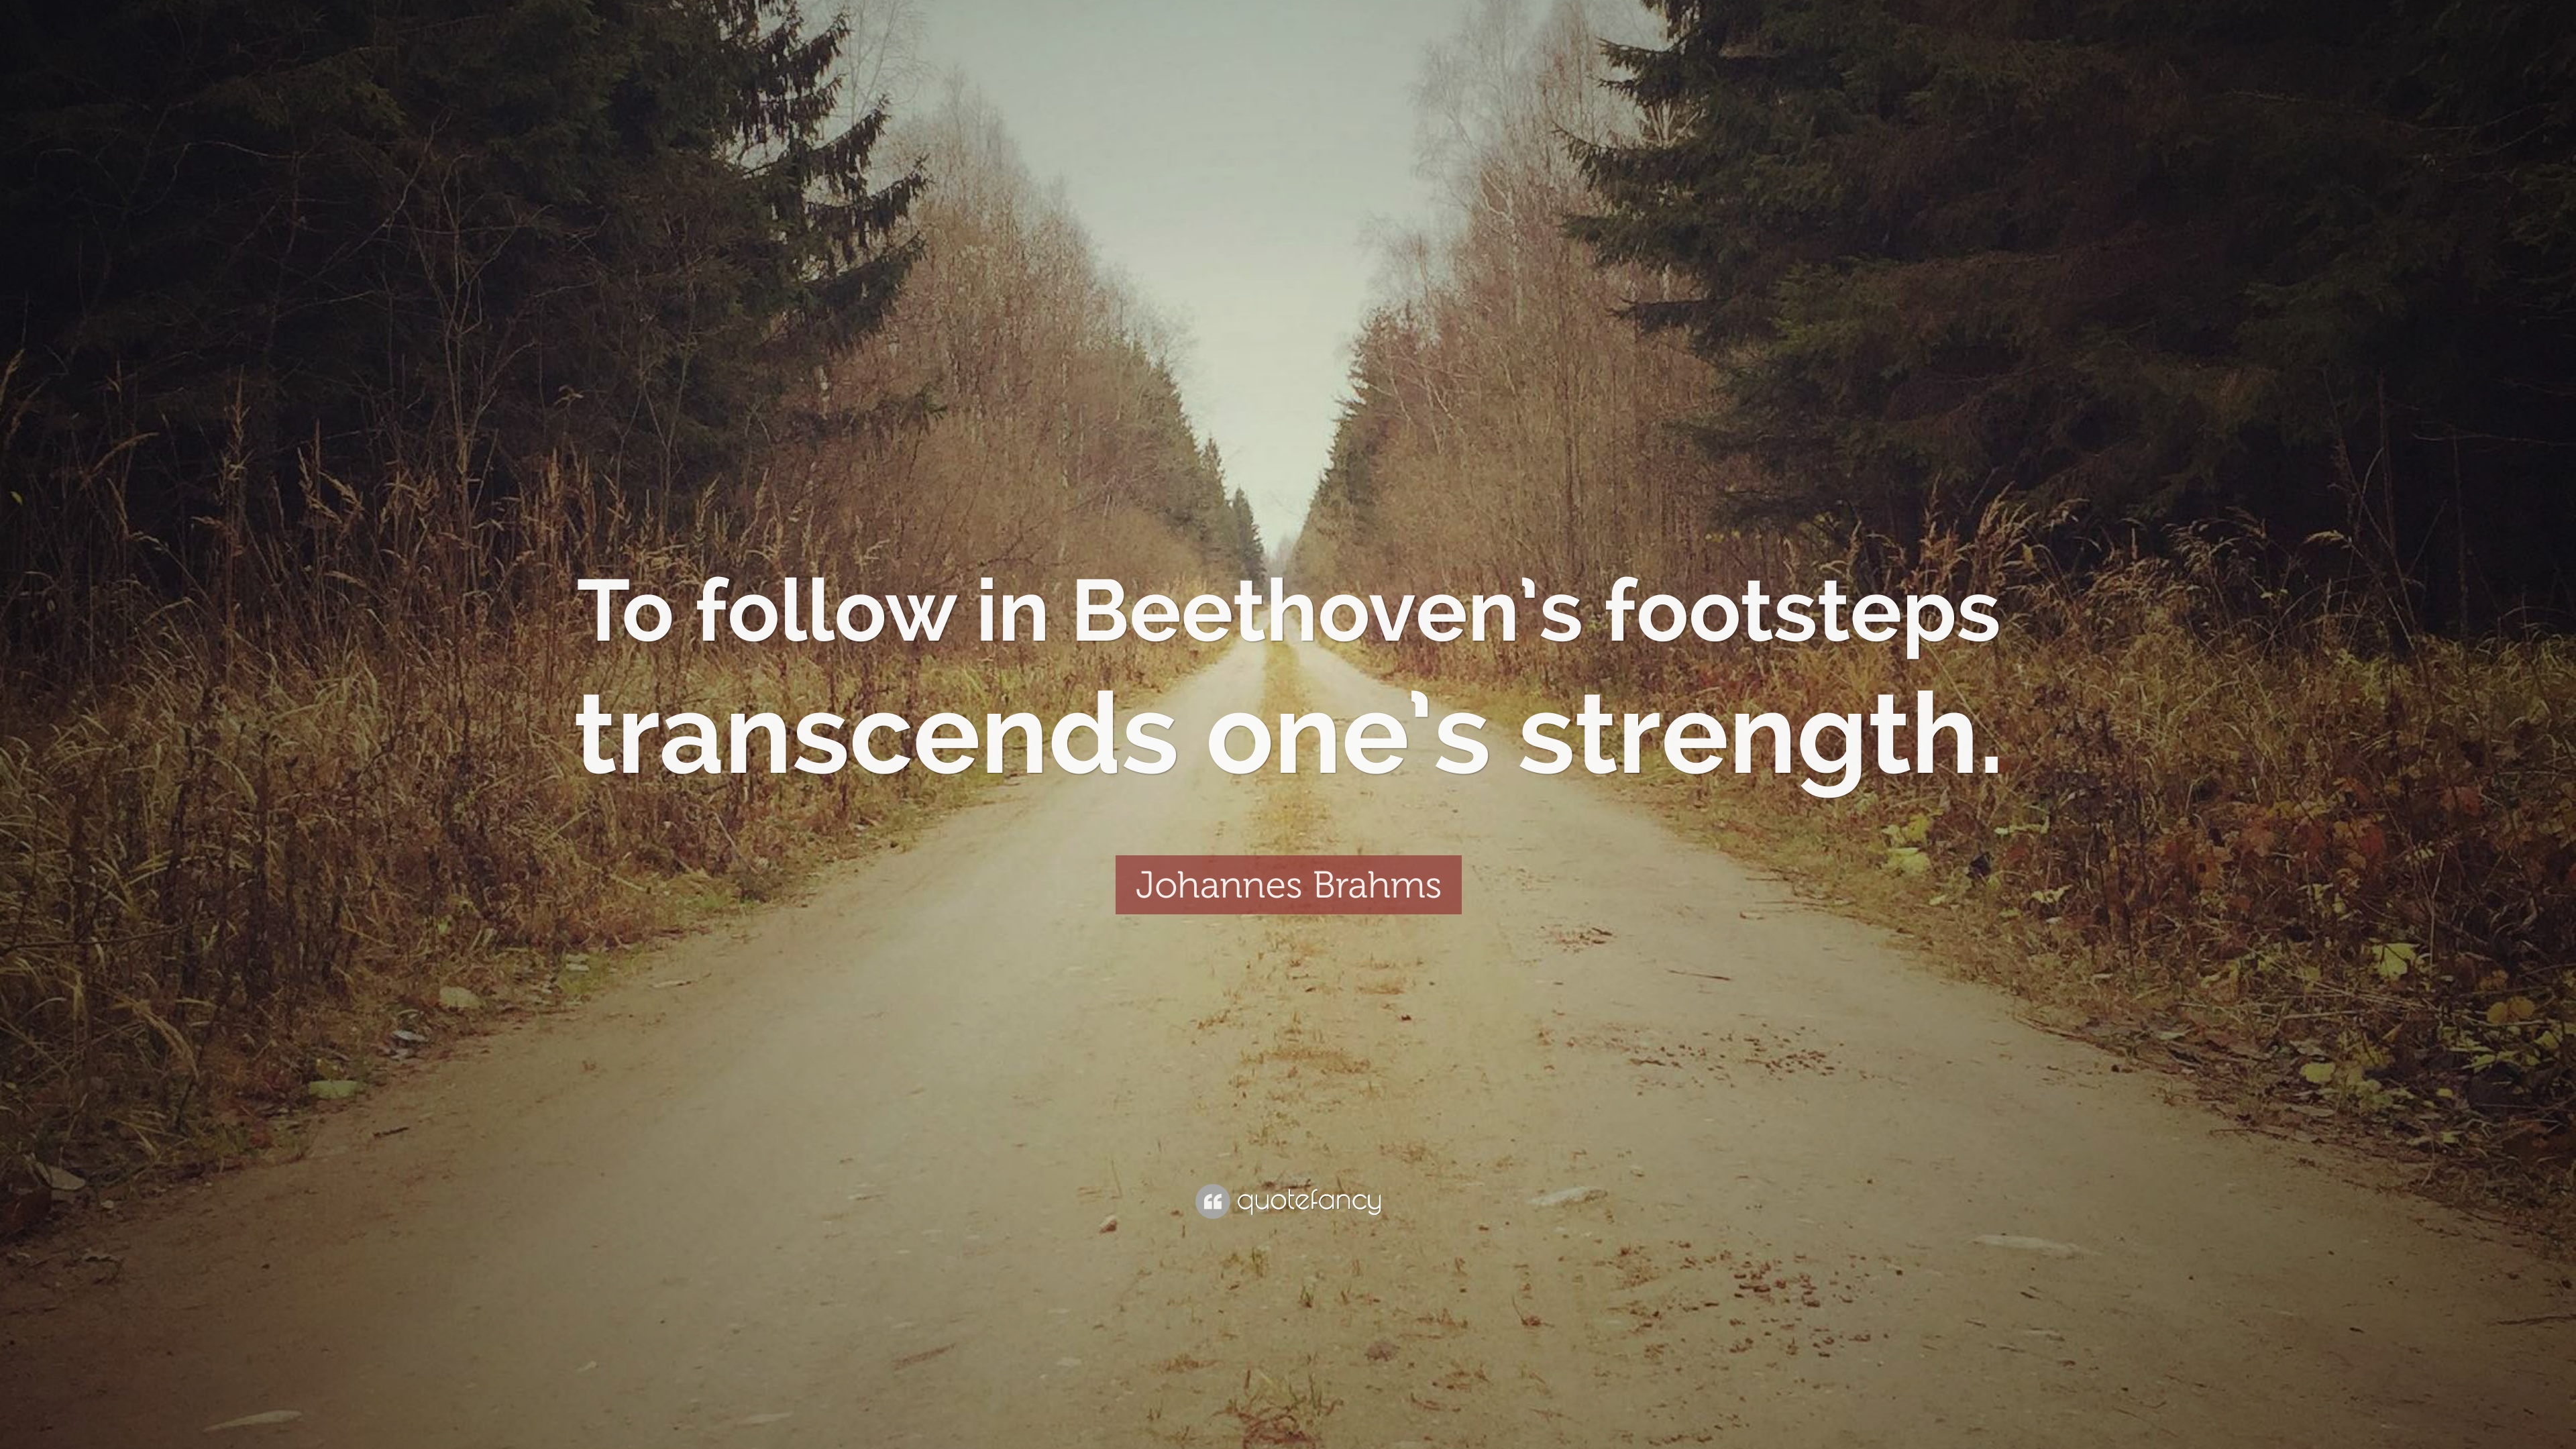 Johannes Brahms Quote: “To follow in Beethoven's footsteps ...